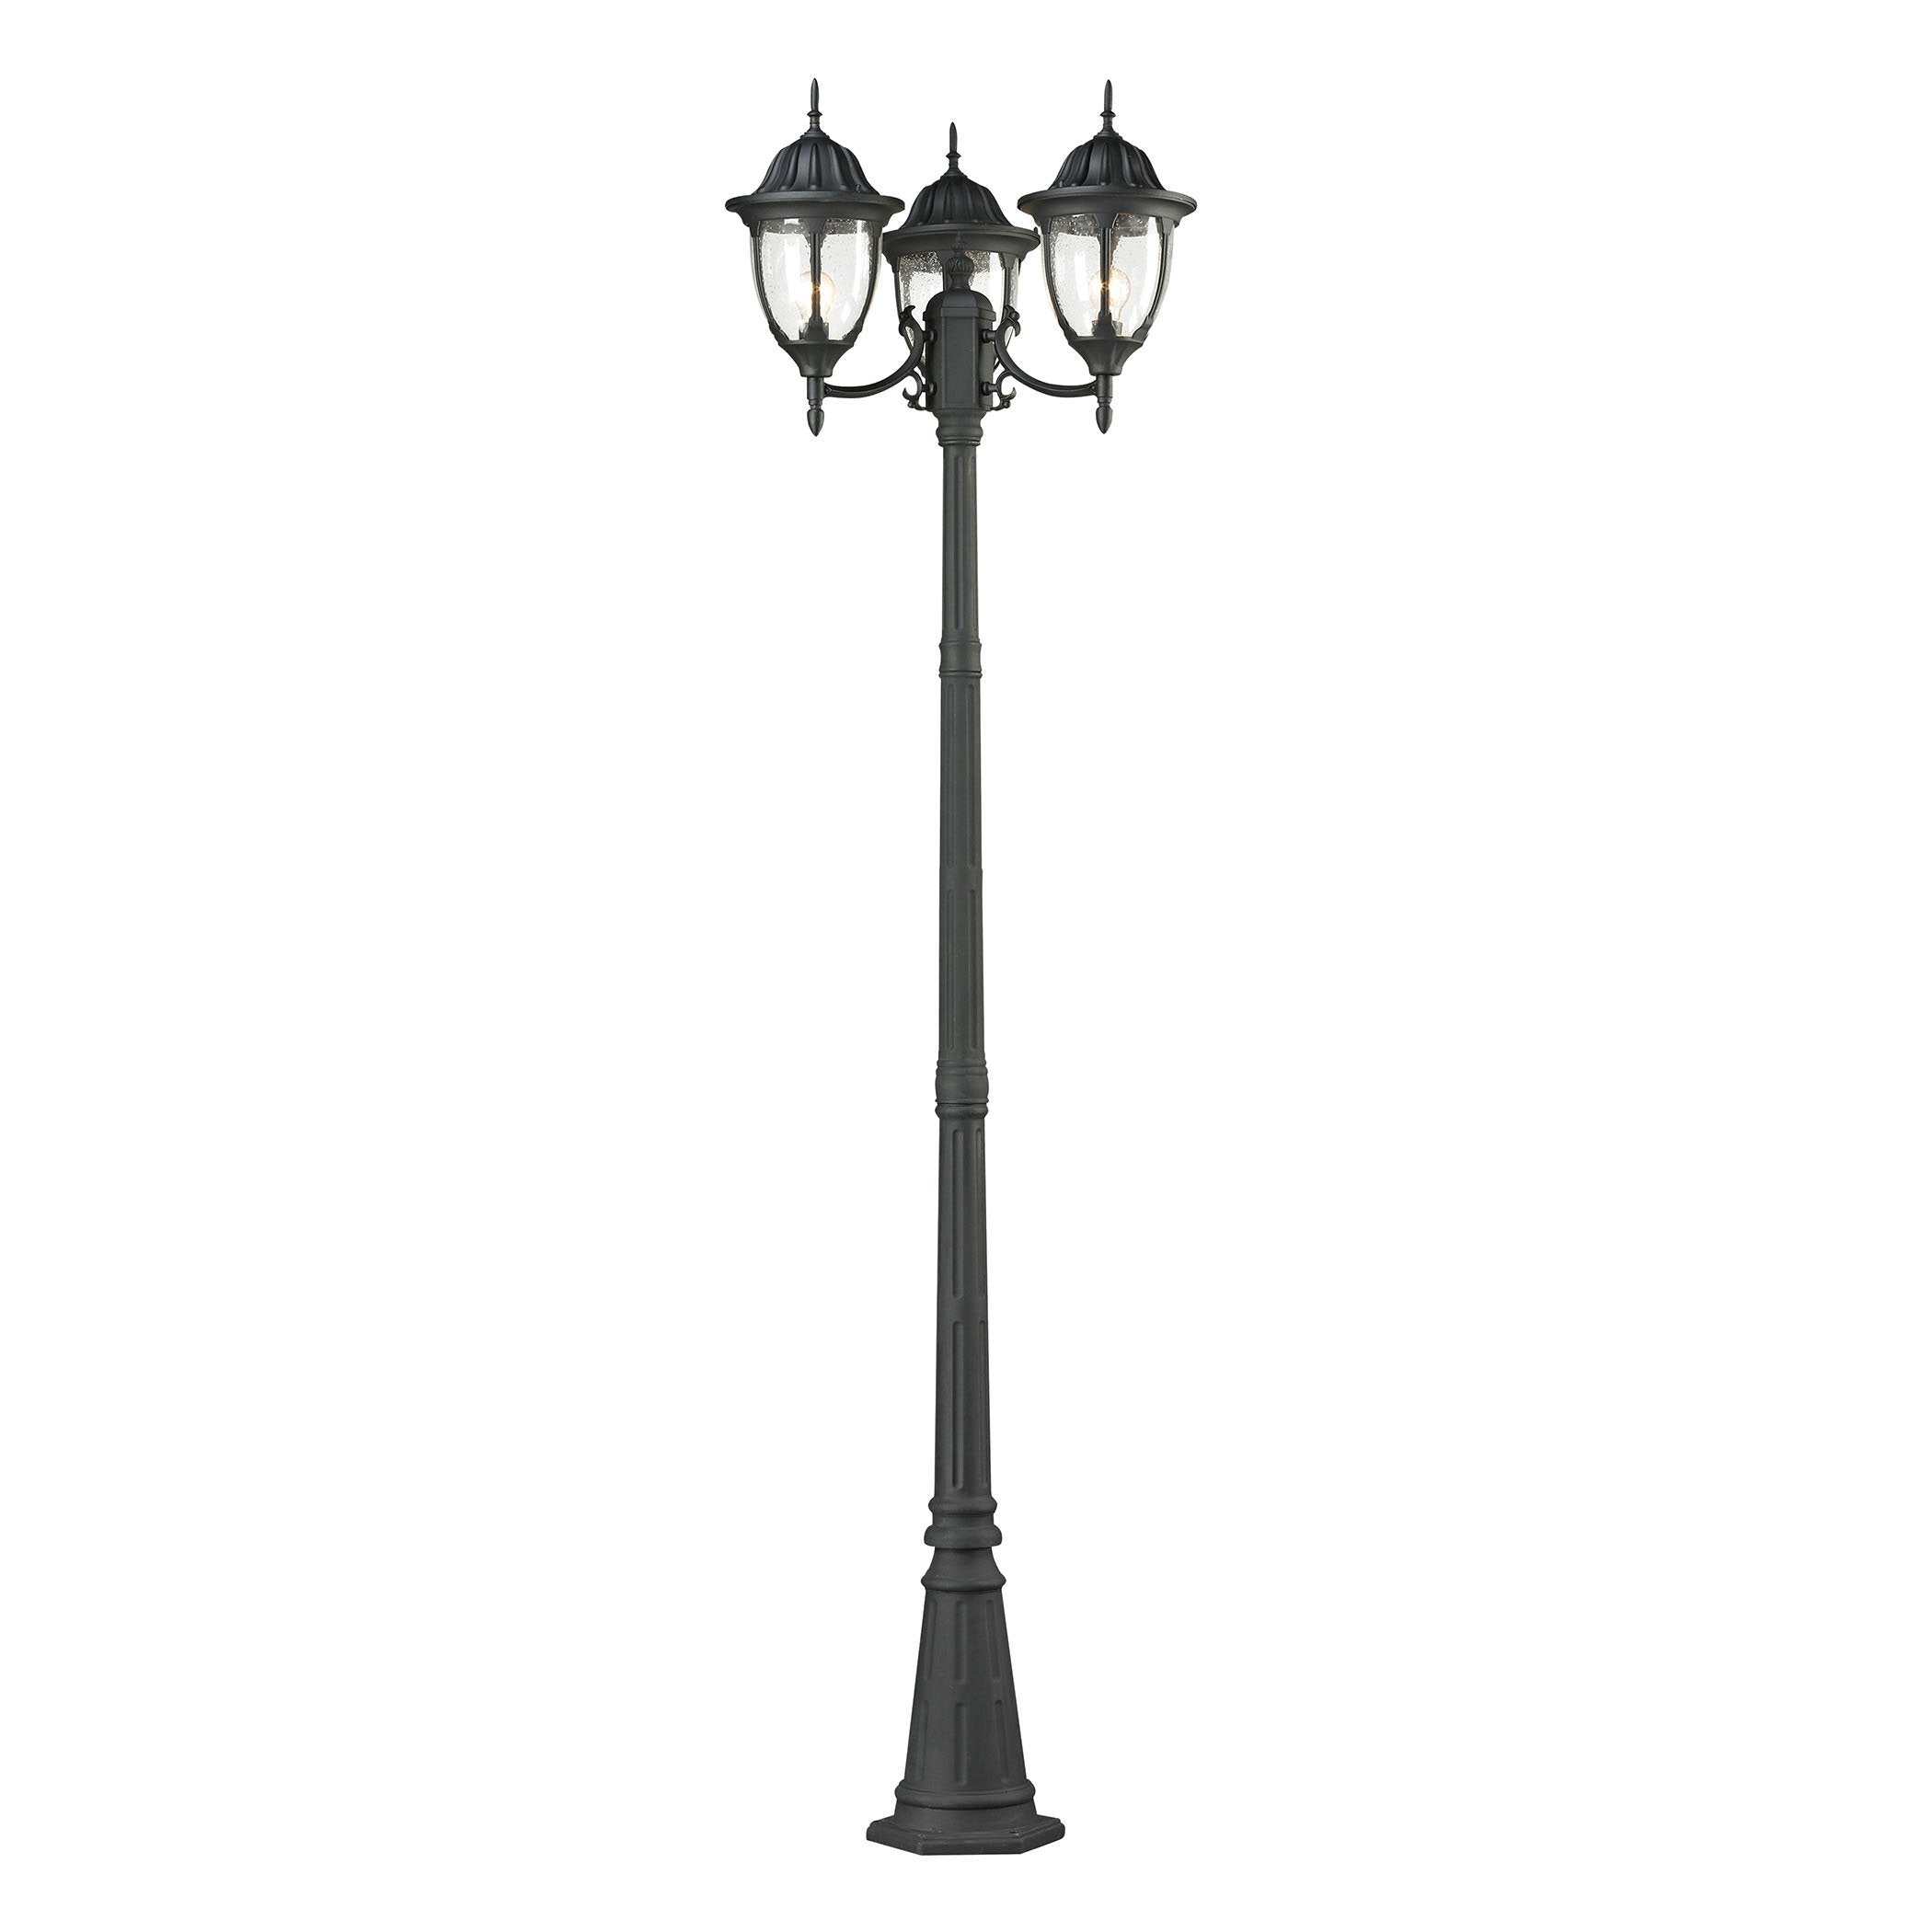 Central Square 3-Light Post Mount Lantern in Charcoal Outdoor Lighting Thomas Lighting 